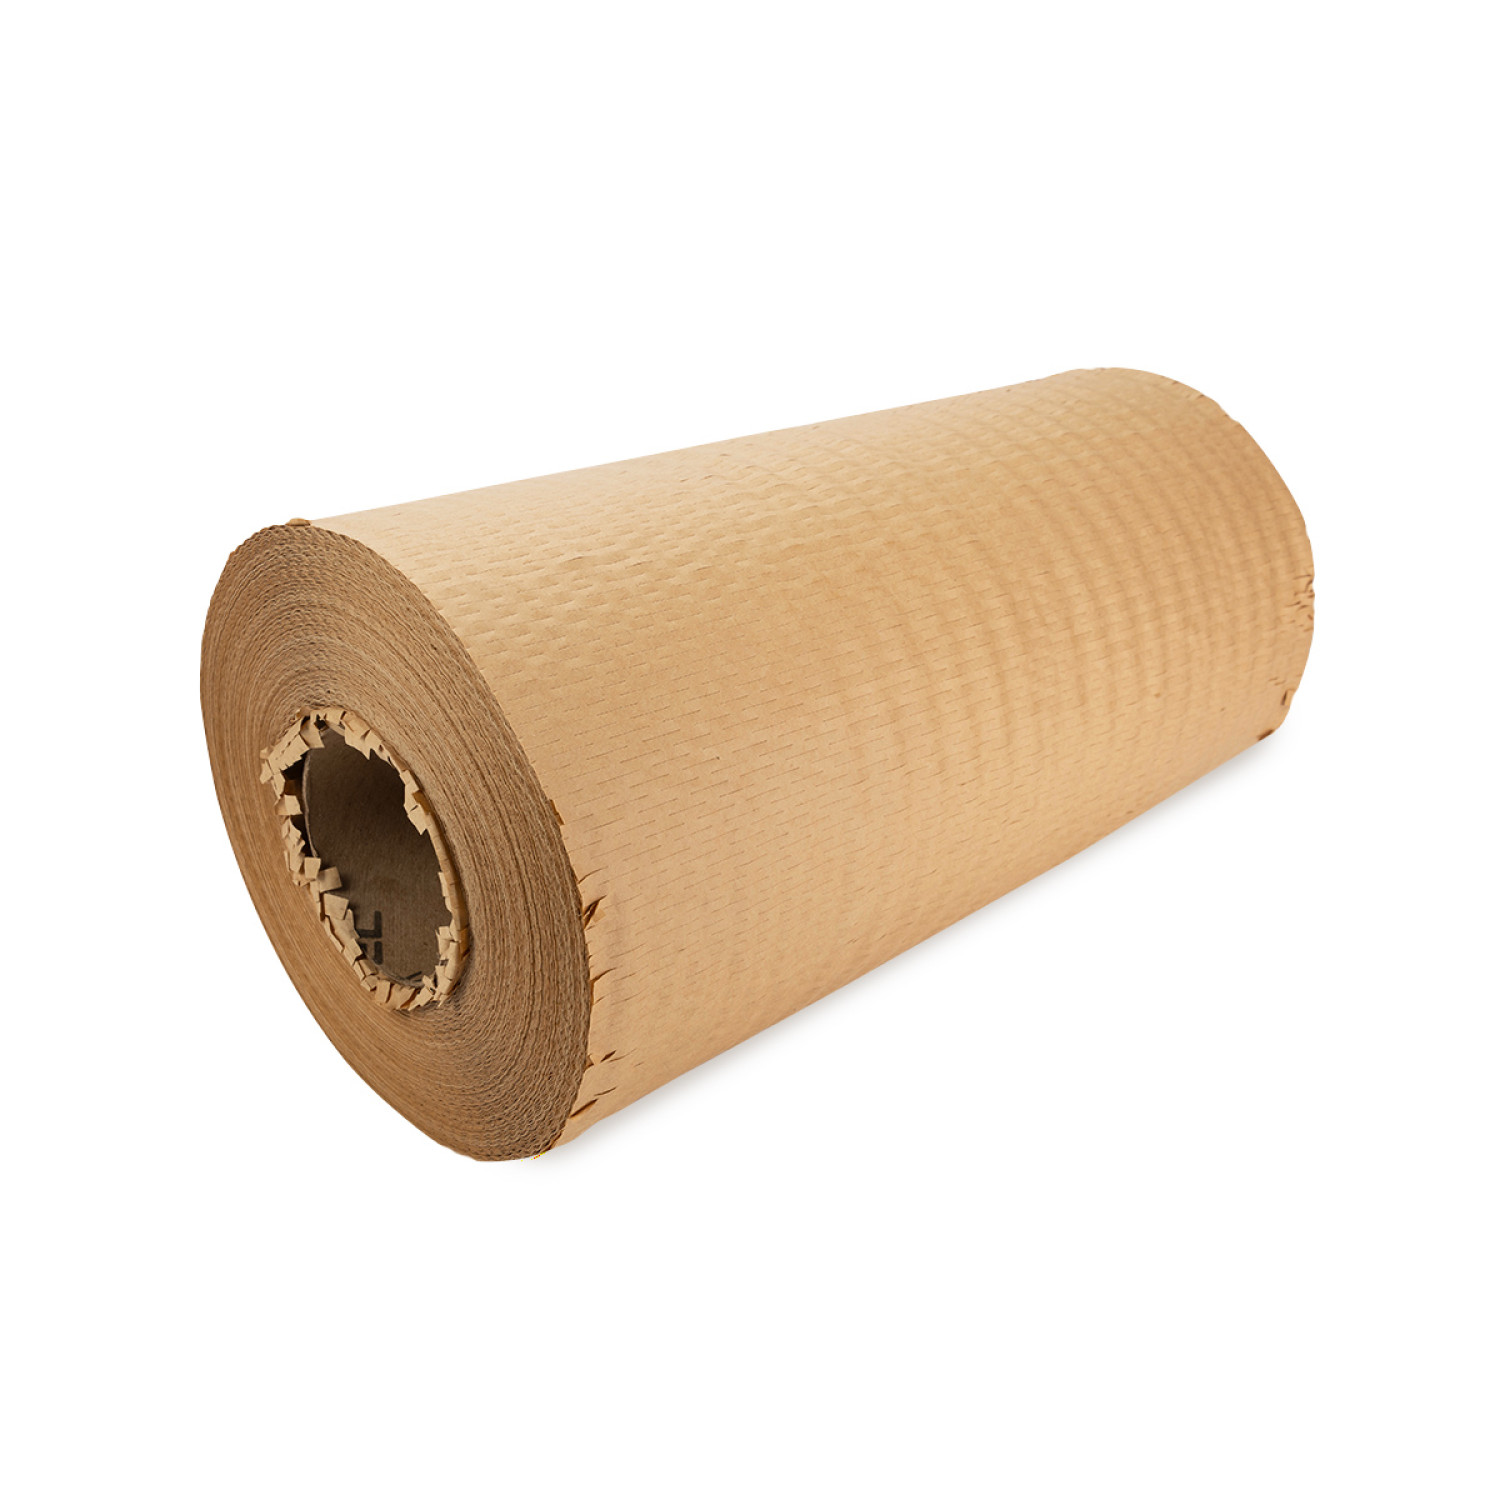 15x328' Honeycomb Packing Paper, 100% Recyclable Honeycomb